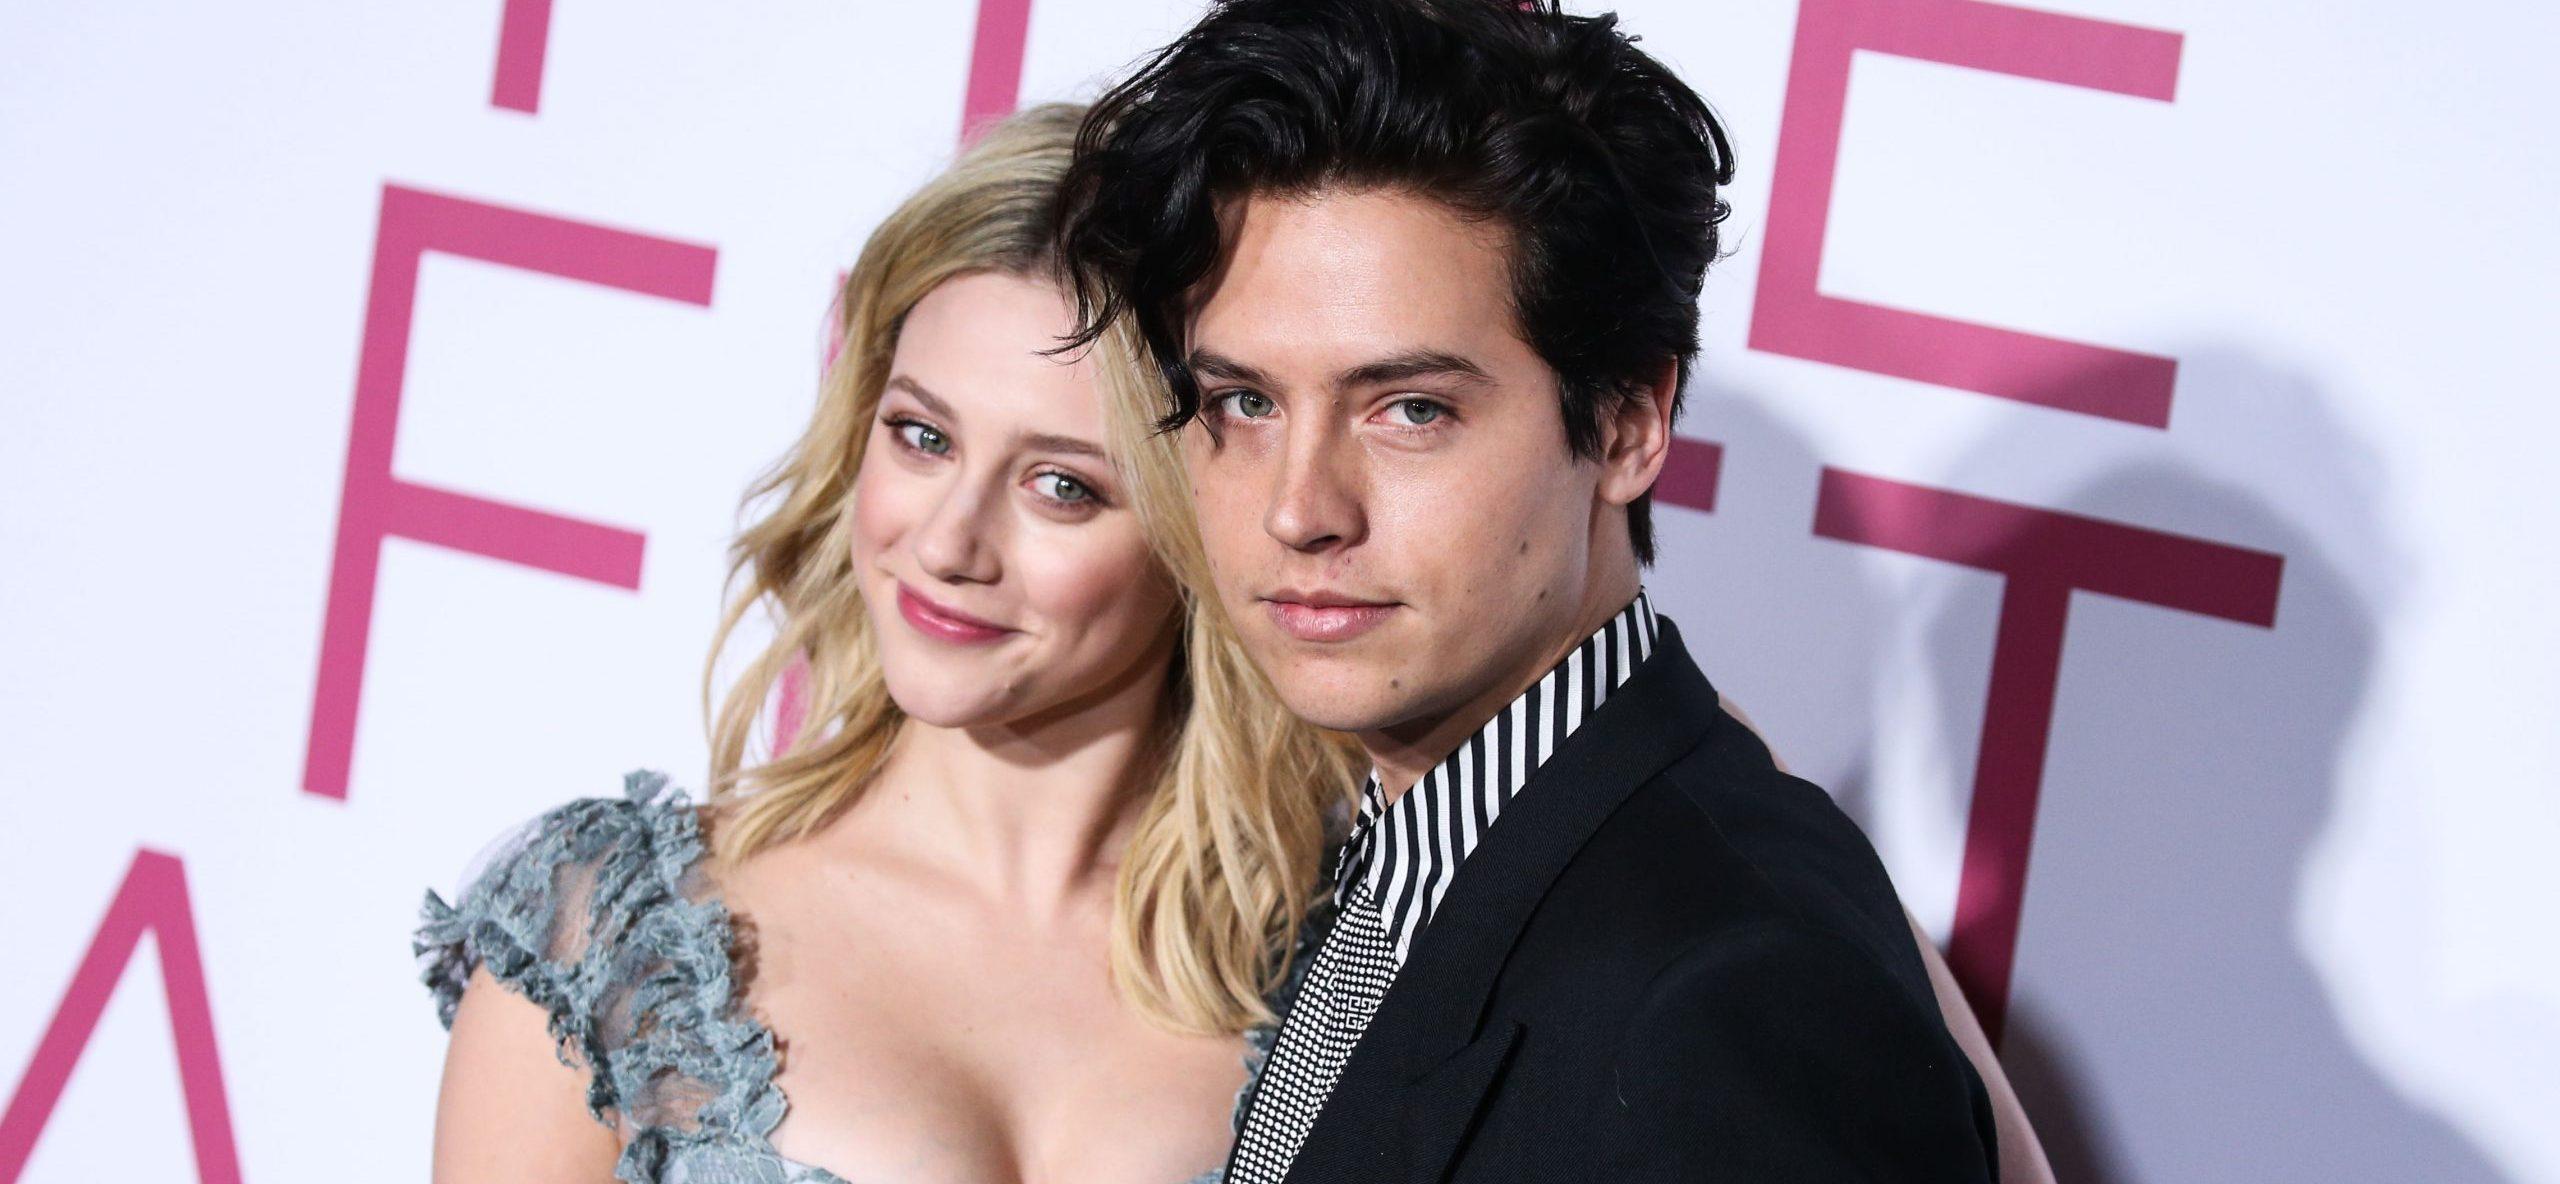 Cole Sprouse On Lili Reinhart Relationship: ‘Had I Loved Myself More, I Would’ve Left A Bit Earlier’